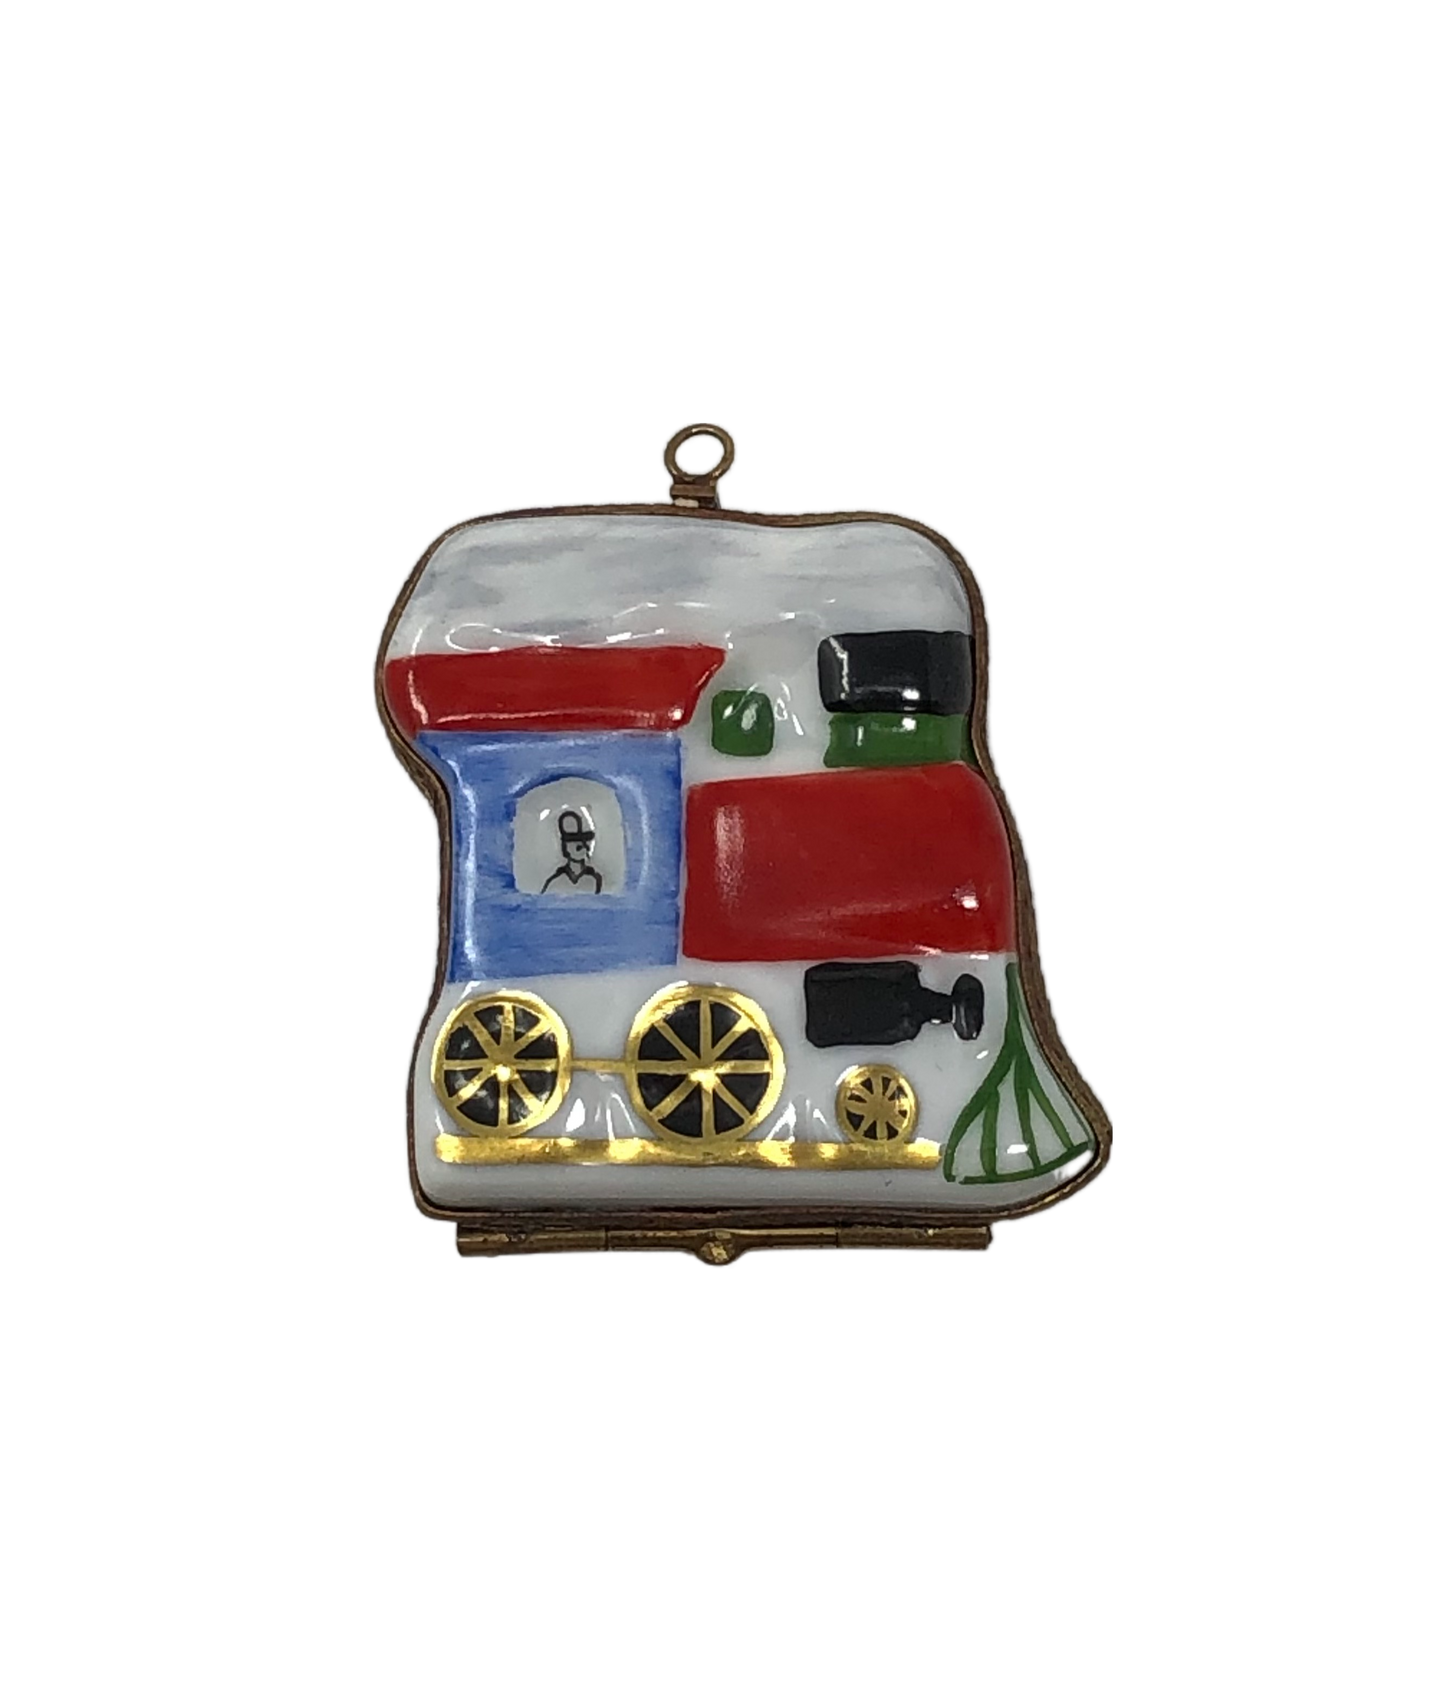 Royal Express: Blue and Red Train with Golden Wheels Limoges Box